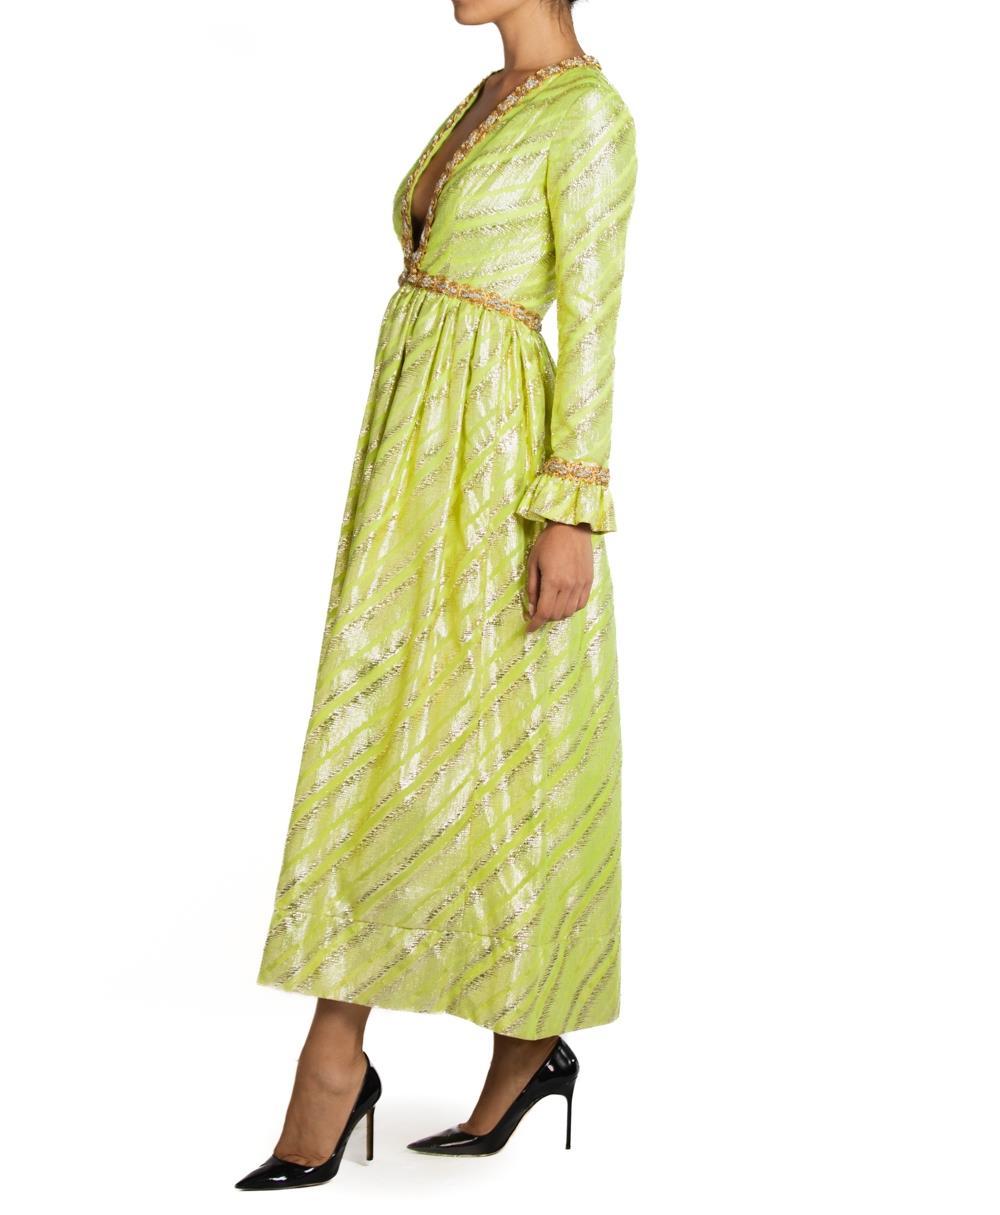 1960S Oscar De La Renta Lime Green Lurex Metallic Gown In Excellent Condition For Sale In New York, NY